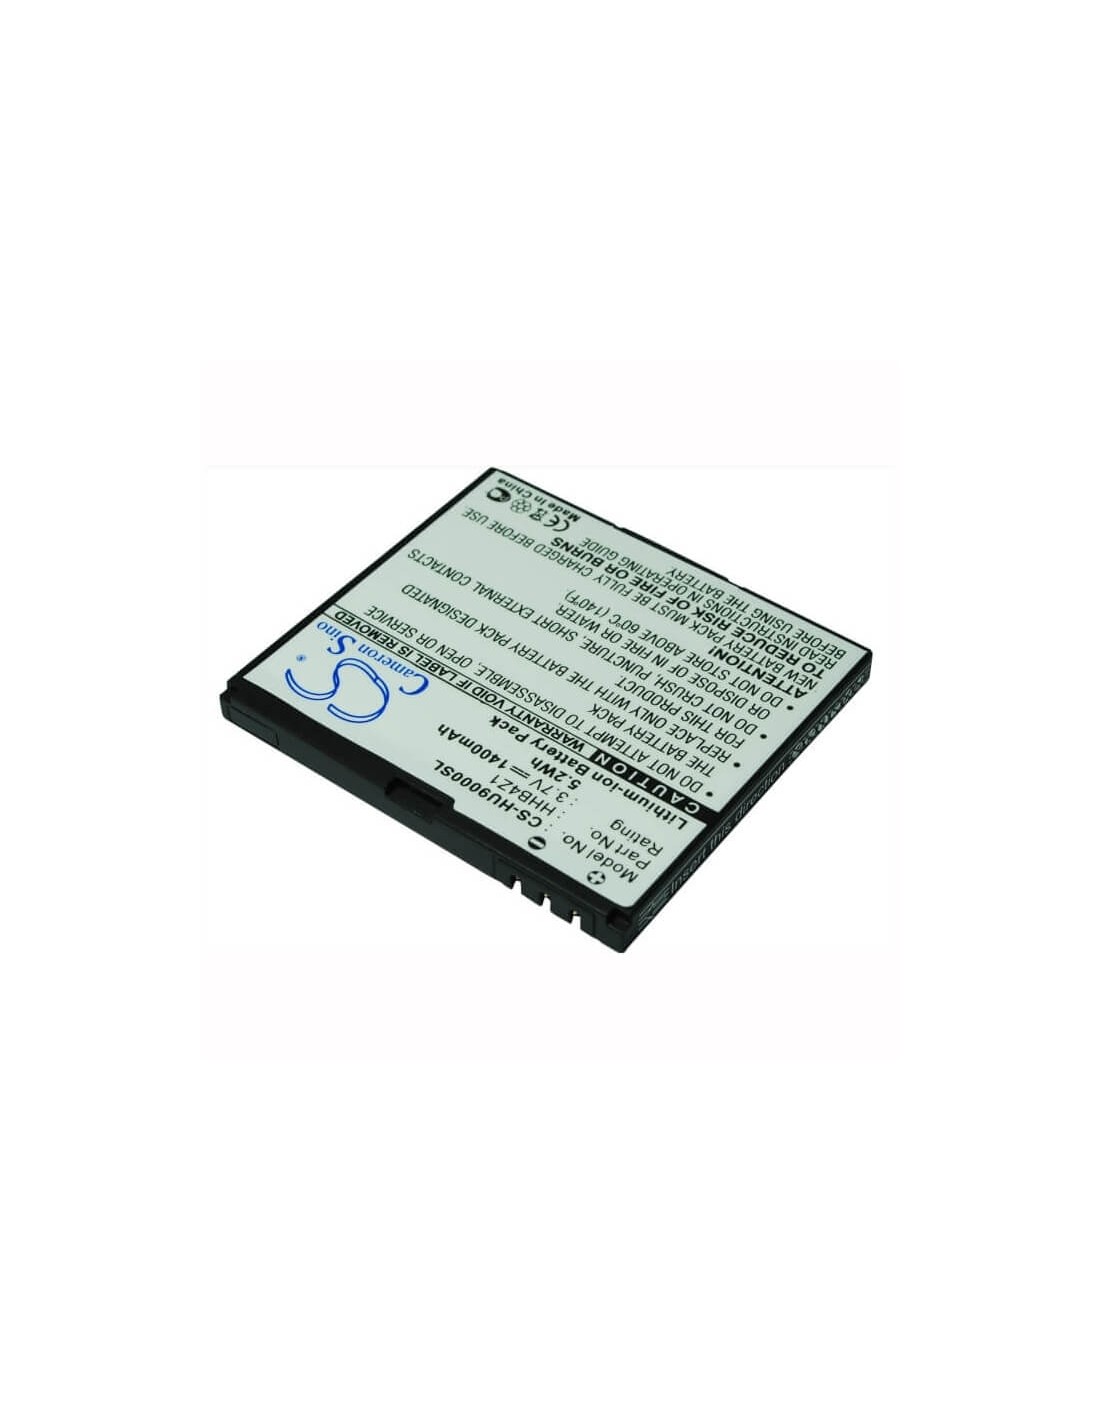 Battery for Huawei ideos X6, ideos U9000, X6 3.7V, 1400mAh - 5.18Wh